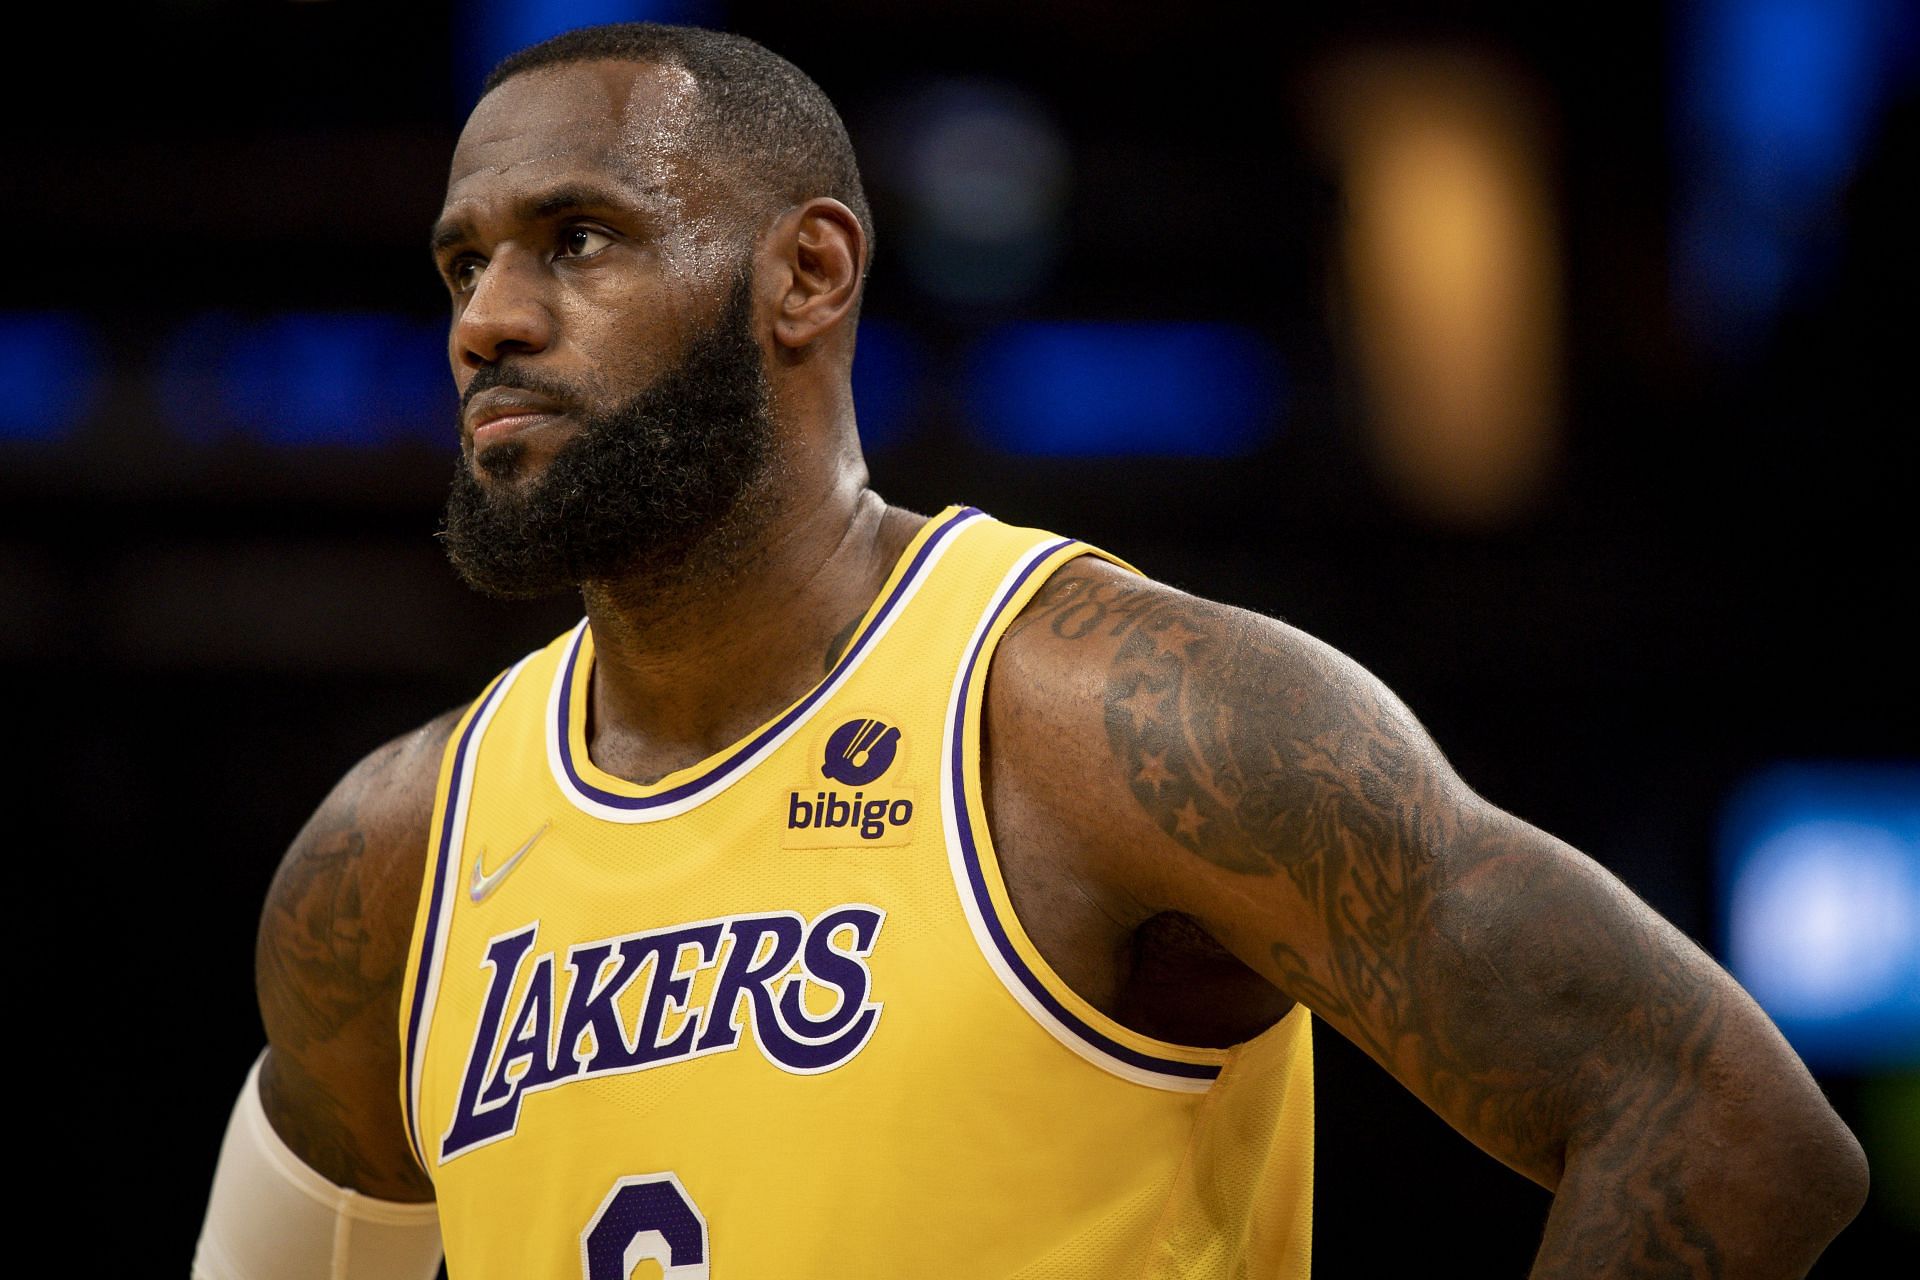 LeBron James has said that he will not let Enes kanter take advantage of using his name